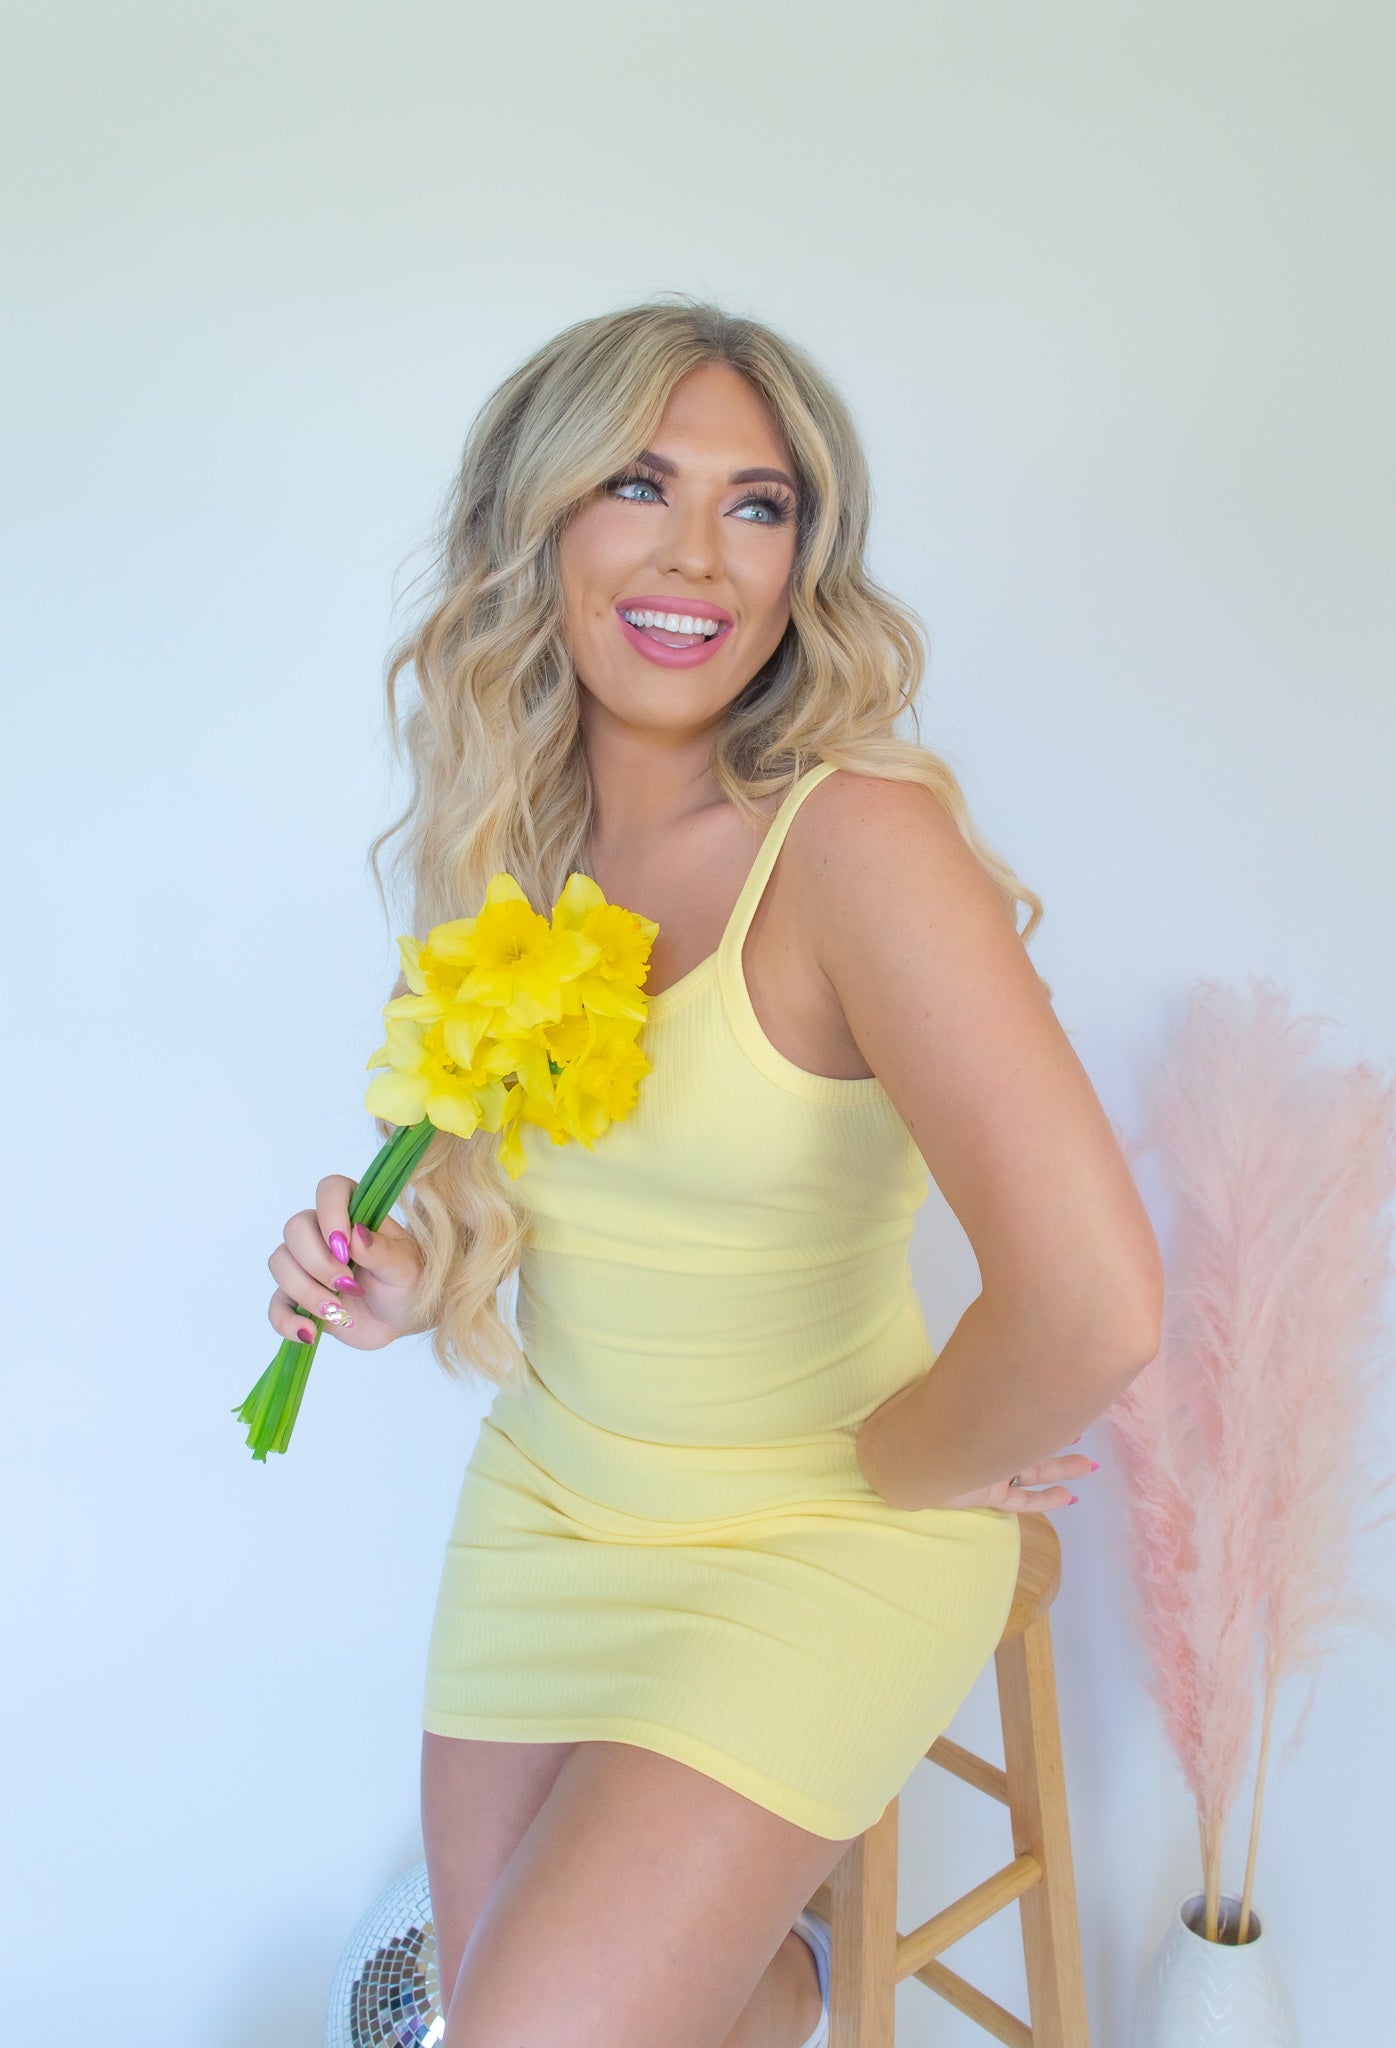 Yellow Bodycon Yellow Dress Tight Bodycon Is Butter A Carb Backless Dress Cotton Dress Basic Dress Spring Dress Spring BodyCon Spring Outfit Nashville Dress Broadway Nashville Outfit